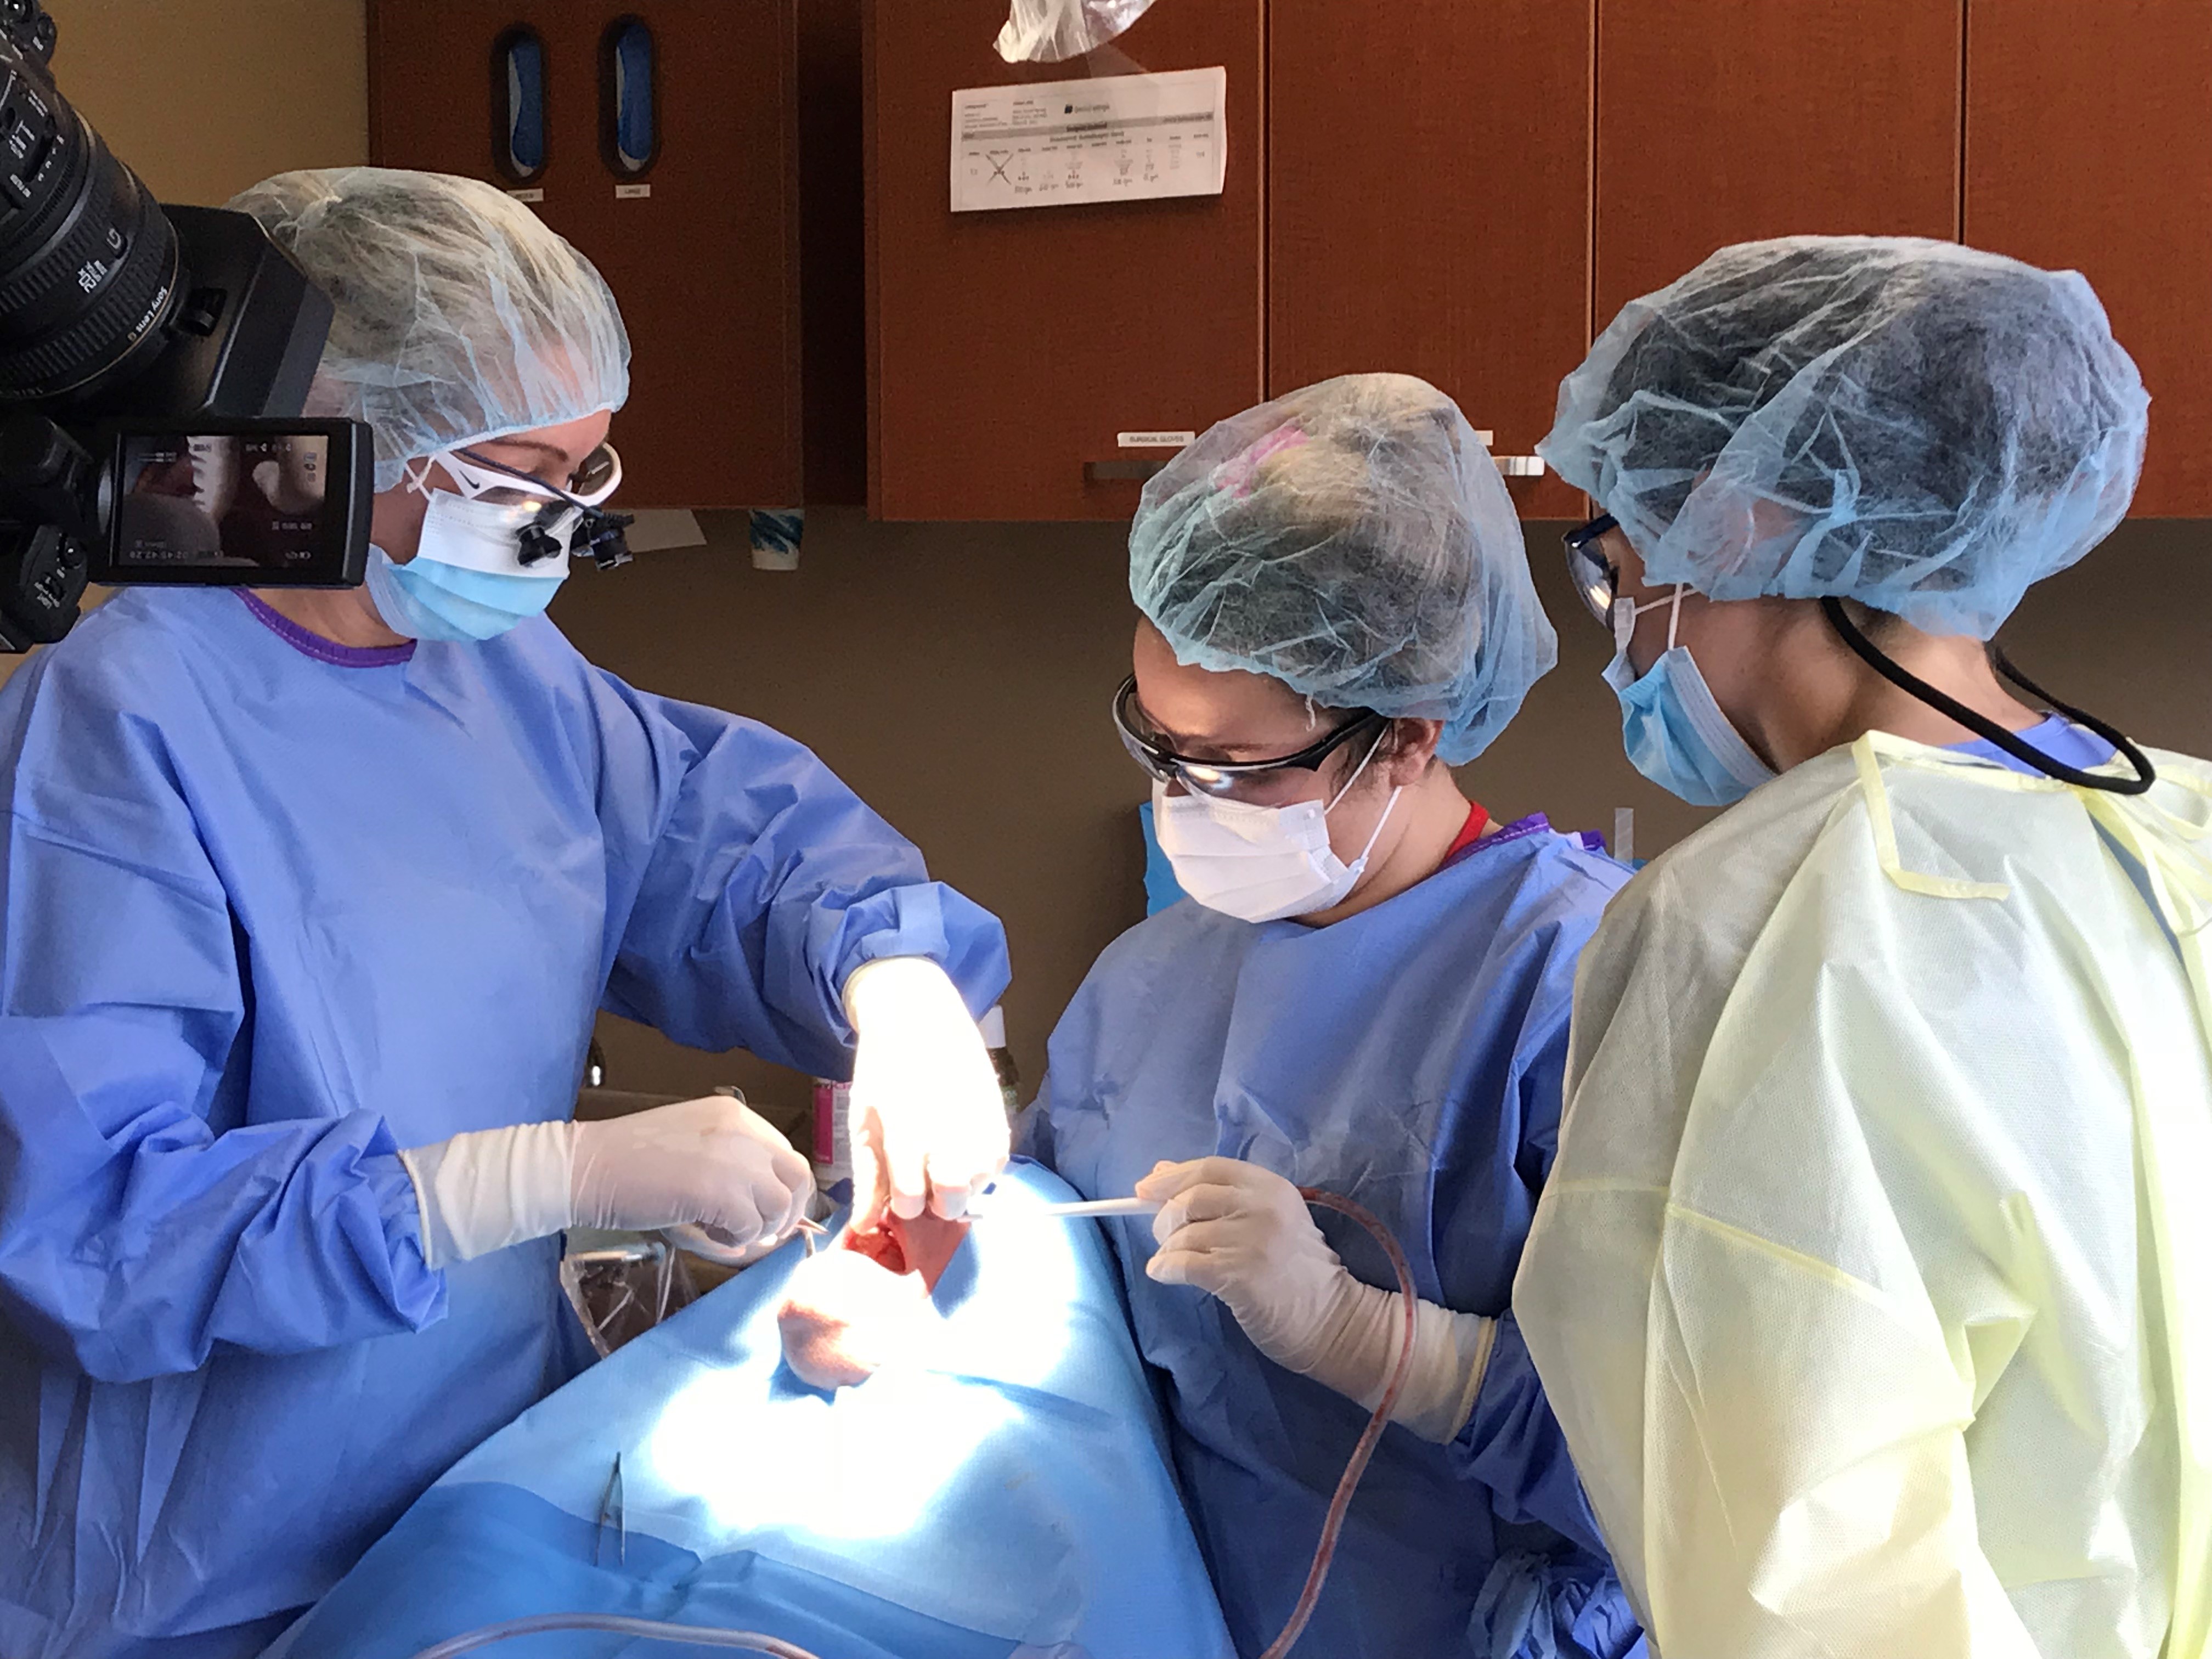 Dr. Kerri Simpson, a resident, performs oral surgery on a patient receiving dental implants.